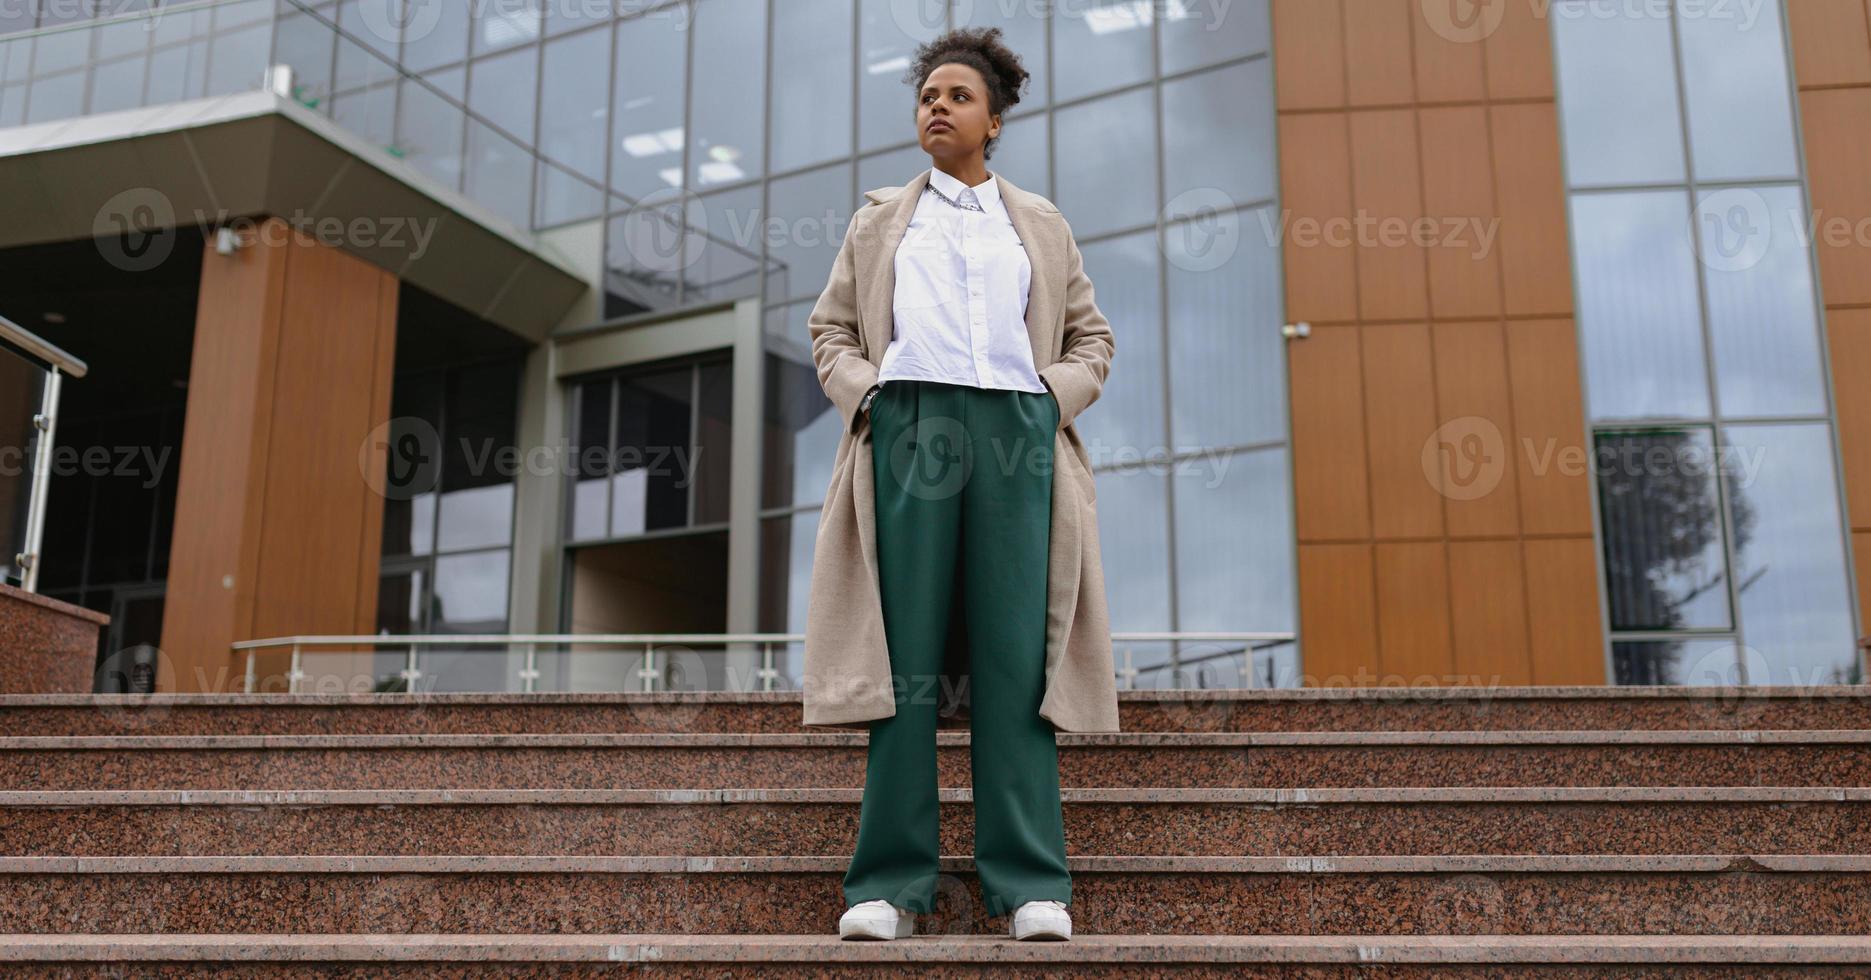 portrait of an African-American student in thought standing on the steps against the backdrop of an administrative city building, successful business deal concept photo